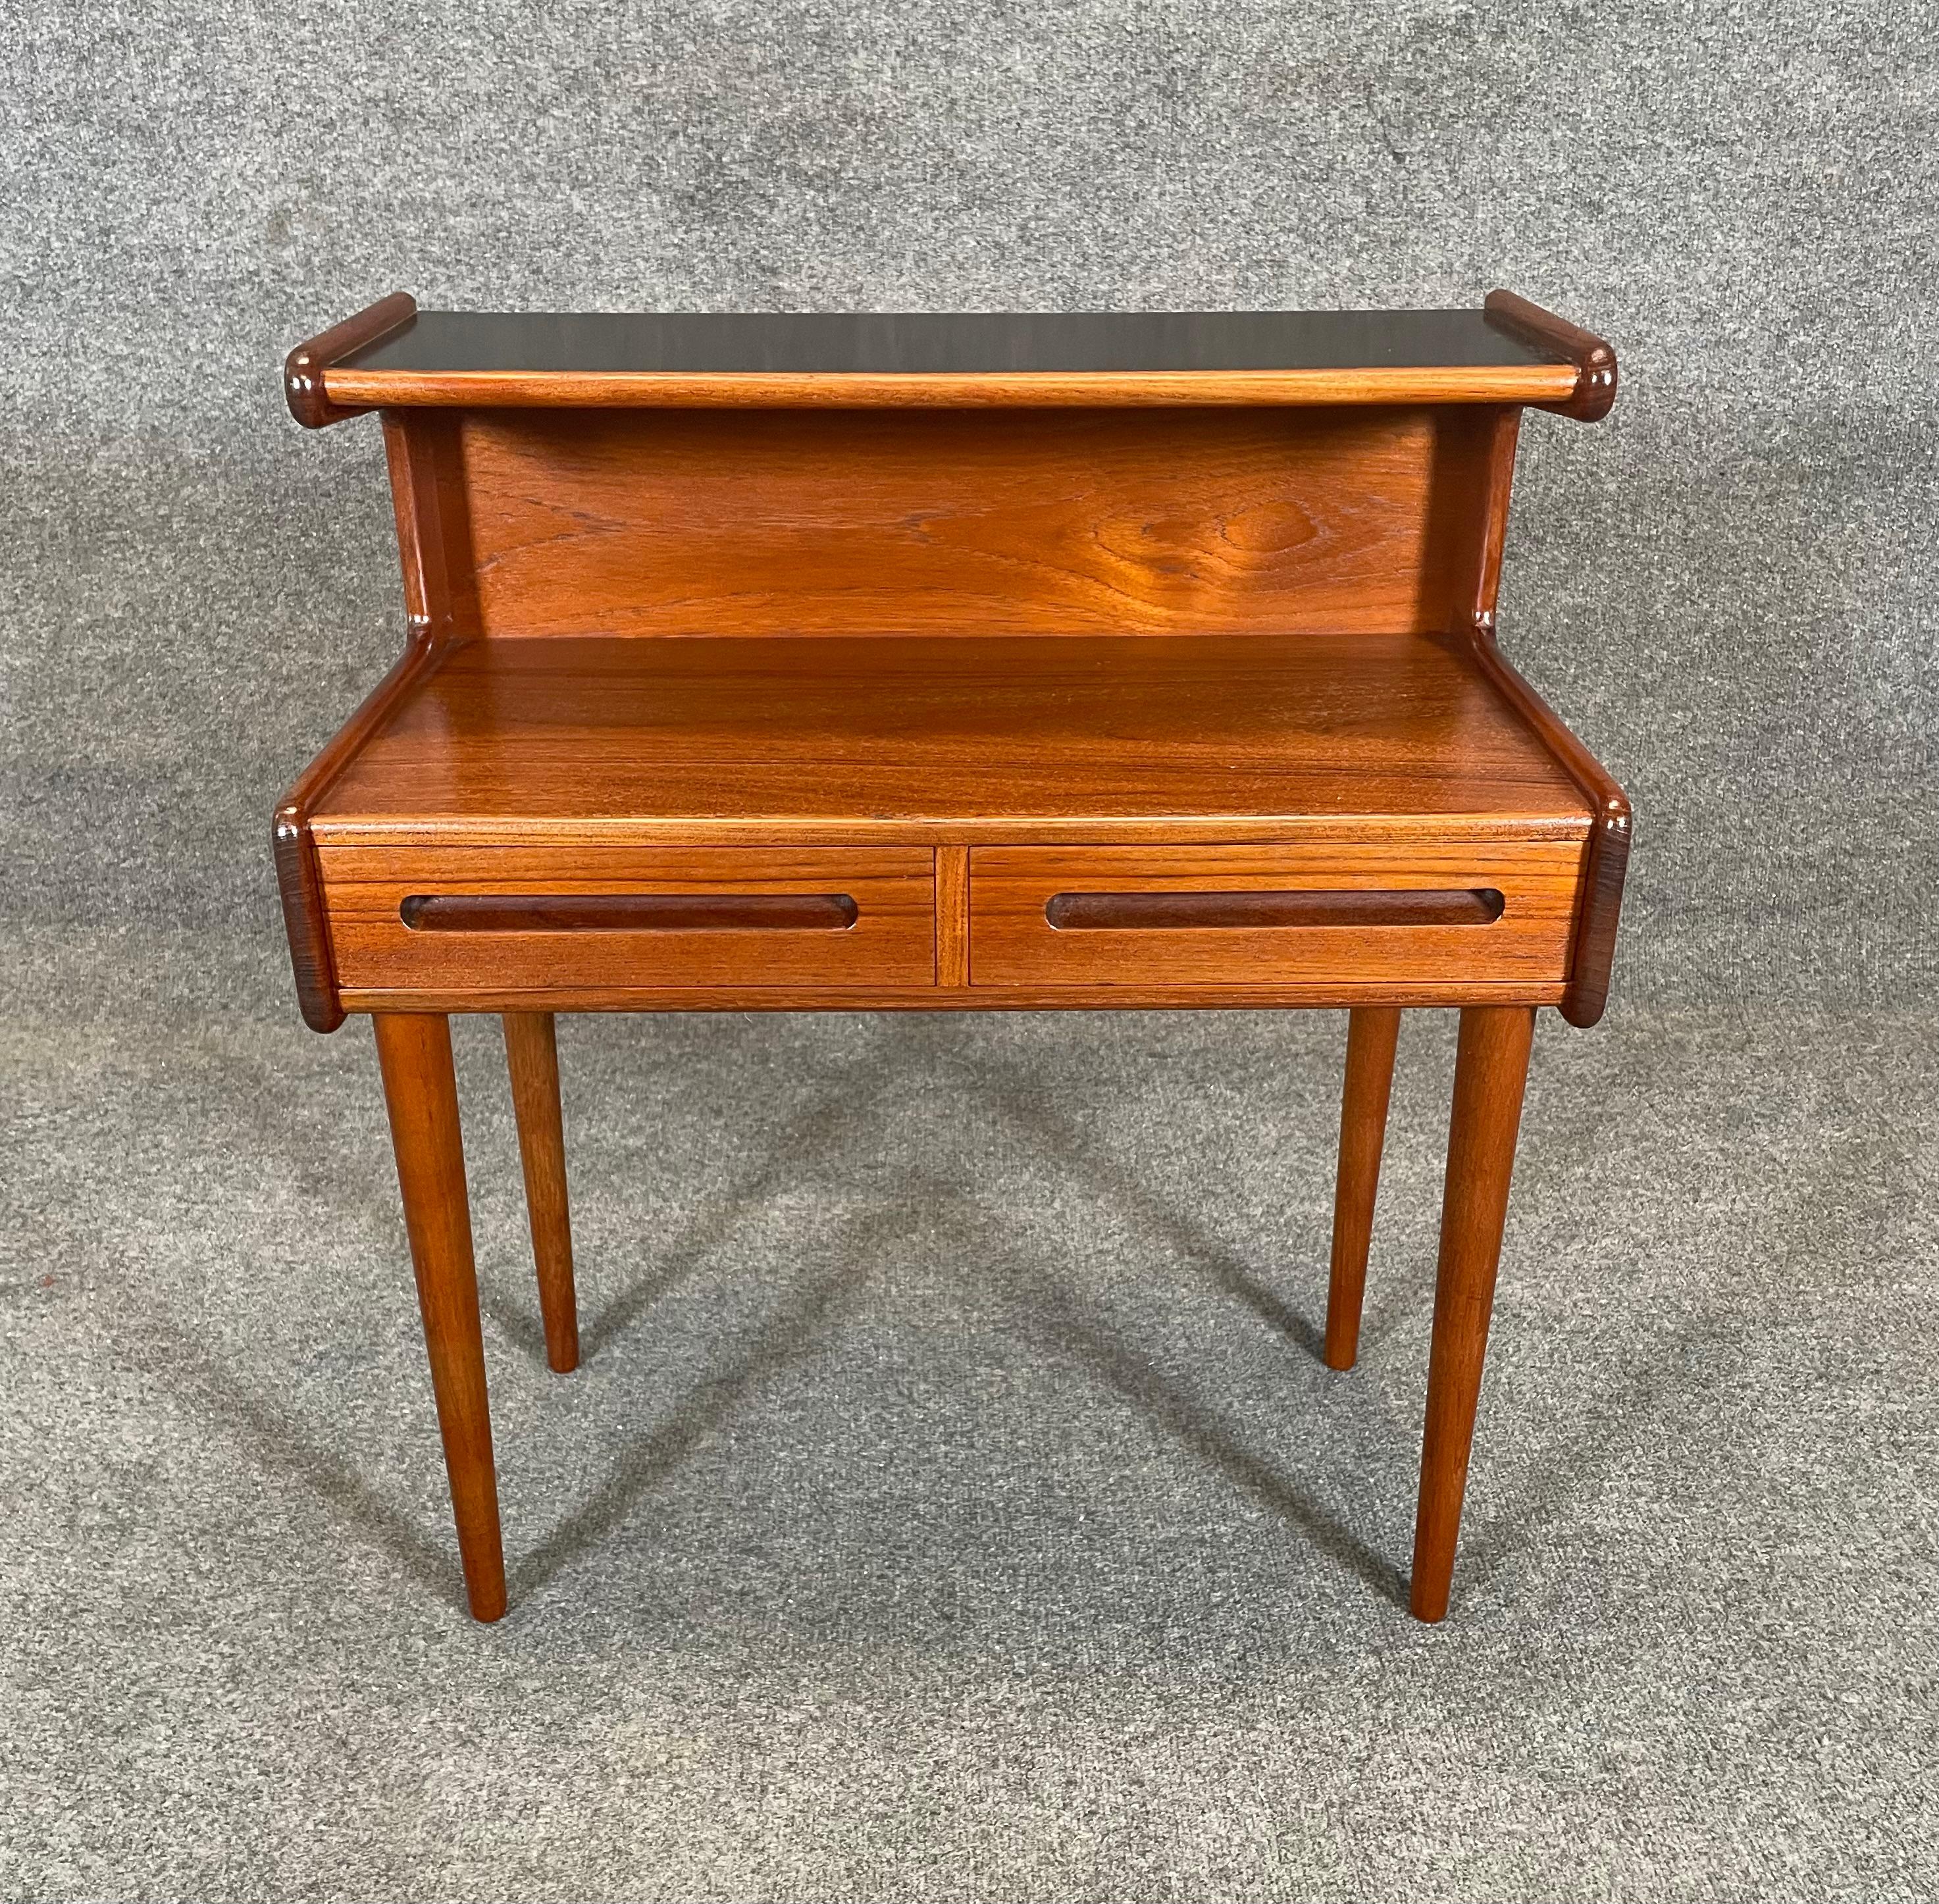 Mid-20th Century Vintage Danish Mid Century Modern Teak Side Table - Entry Chest For Sale